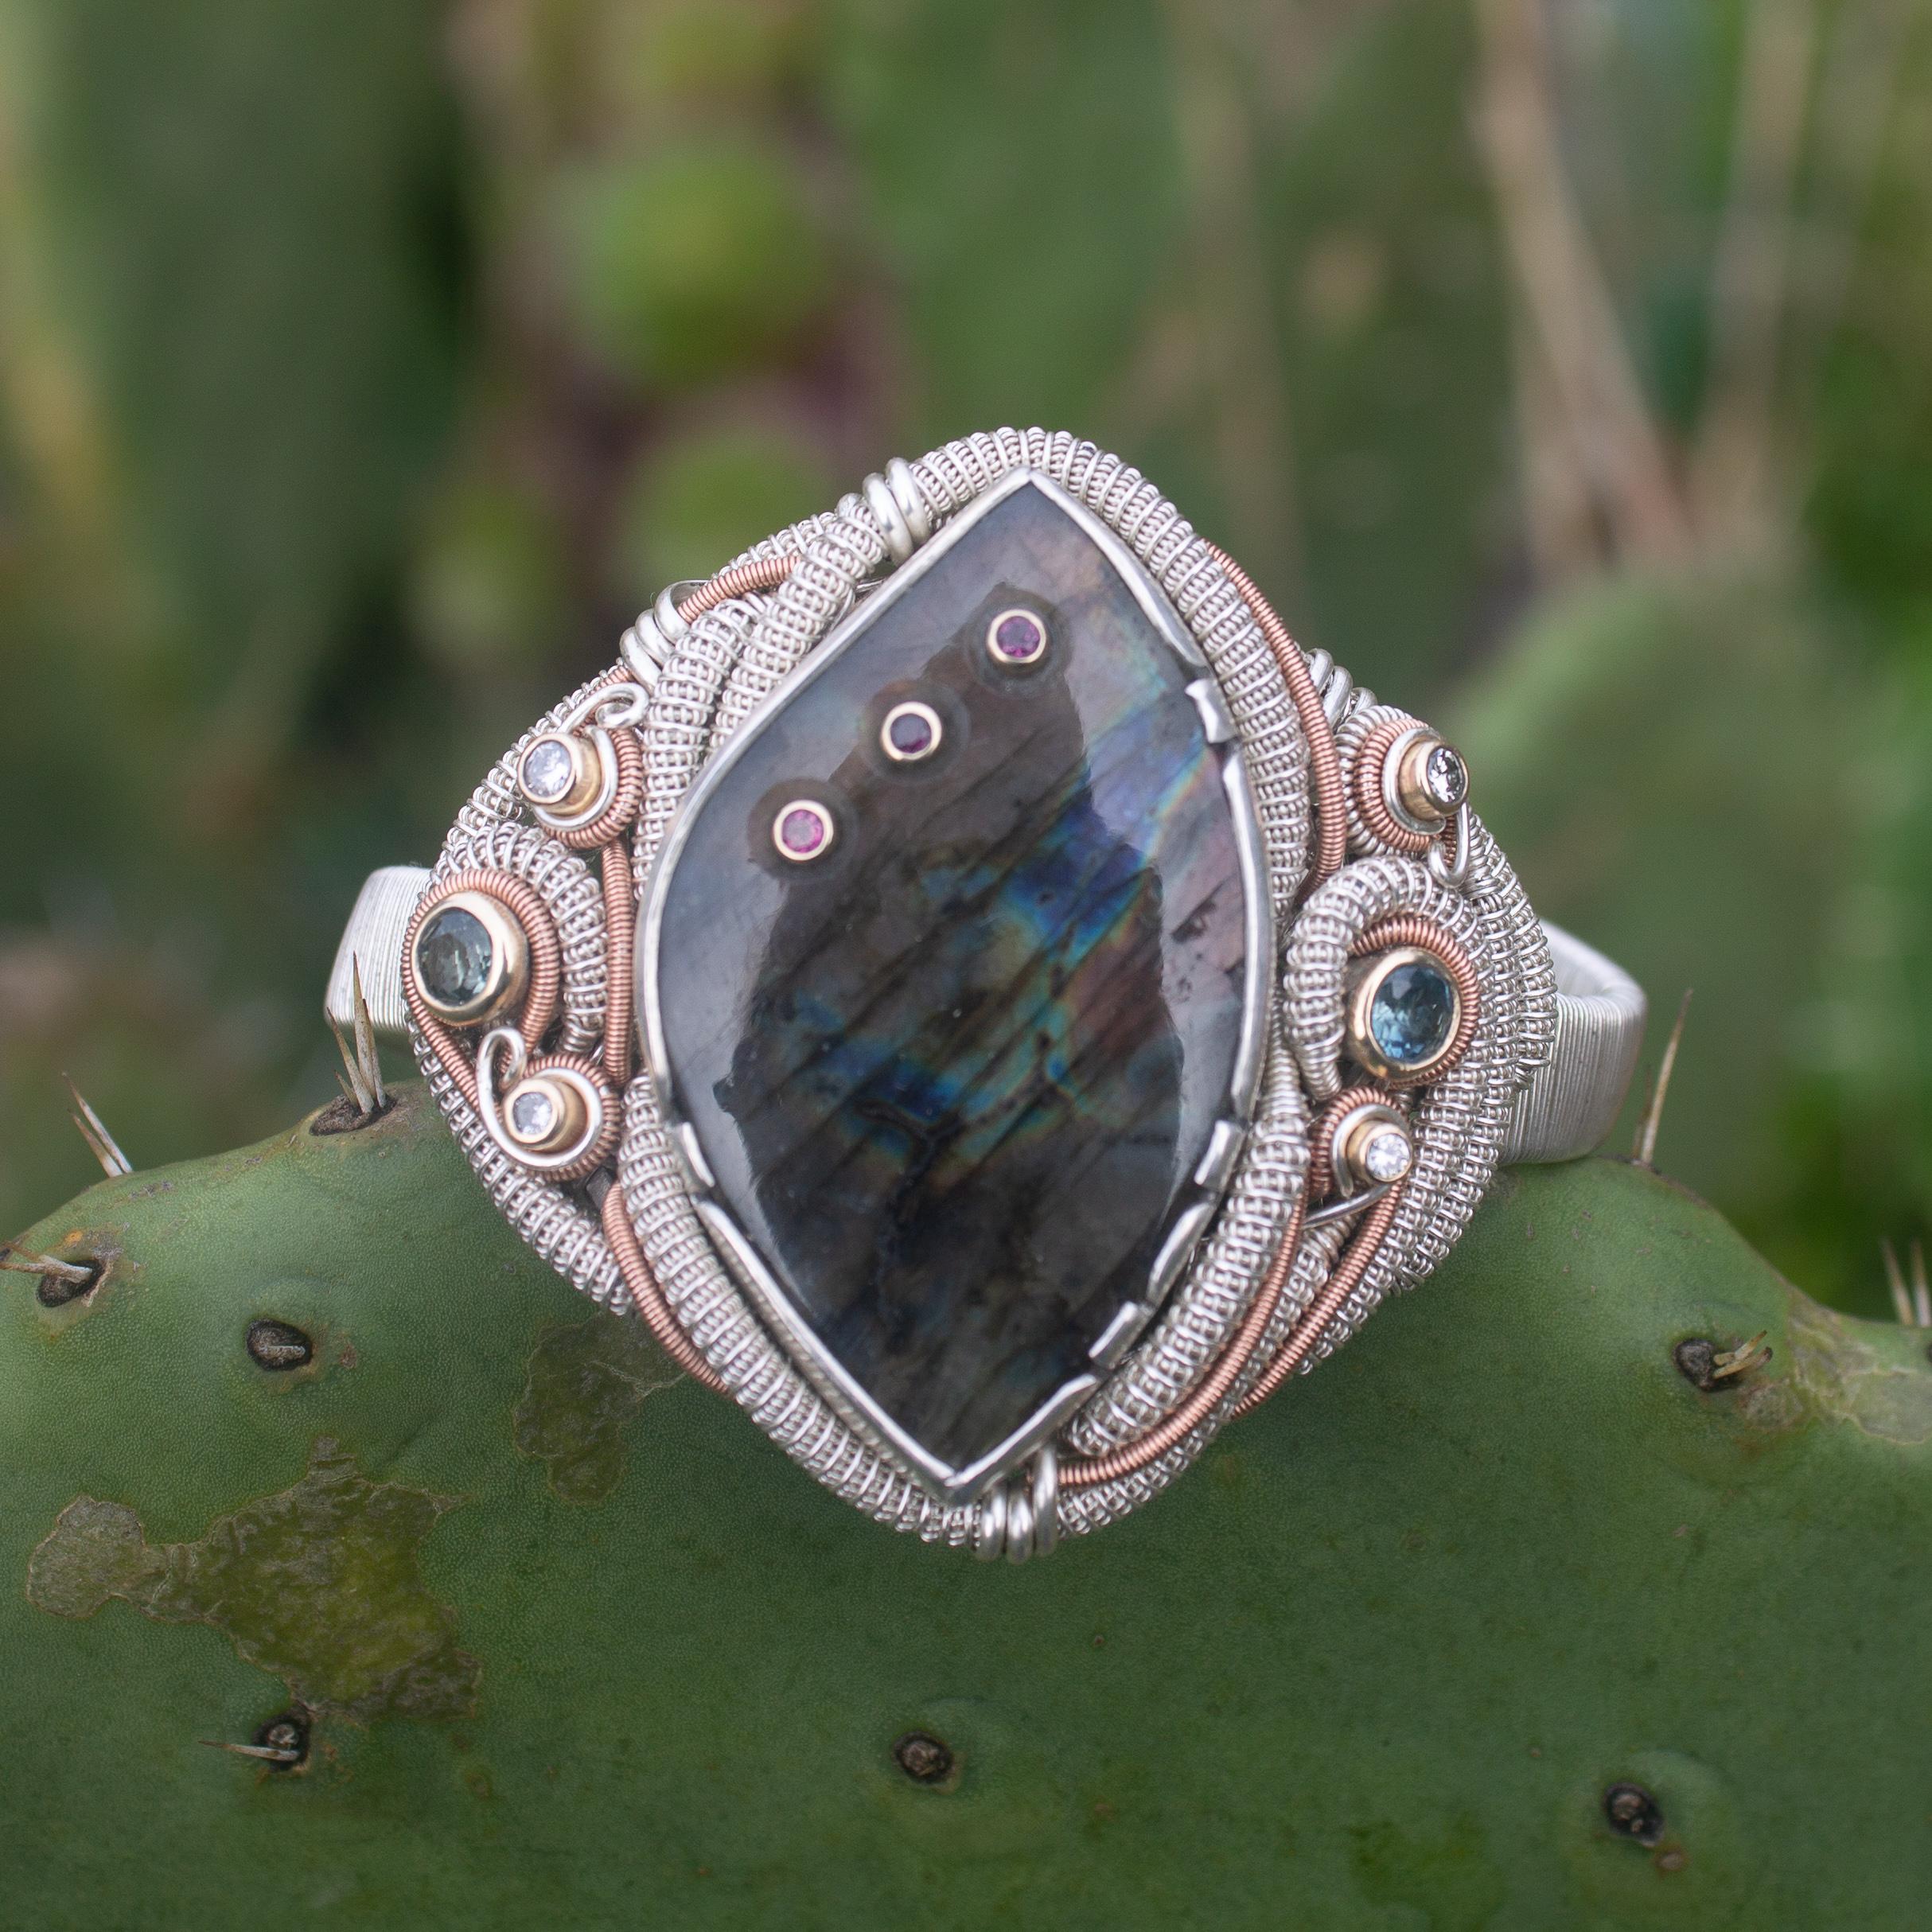 A gorgeous Labradorite with three purple Garnets set in the stone in 14 karat gold. Paired with Diamonds, Montana Sapphires, silver and 14 karat rose gold, this bracelet is truly one of a kind. Combining various techniques such as wire wrapping,